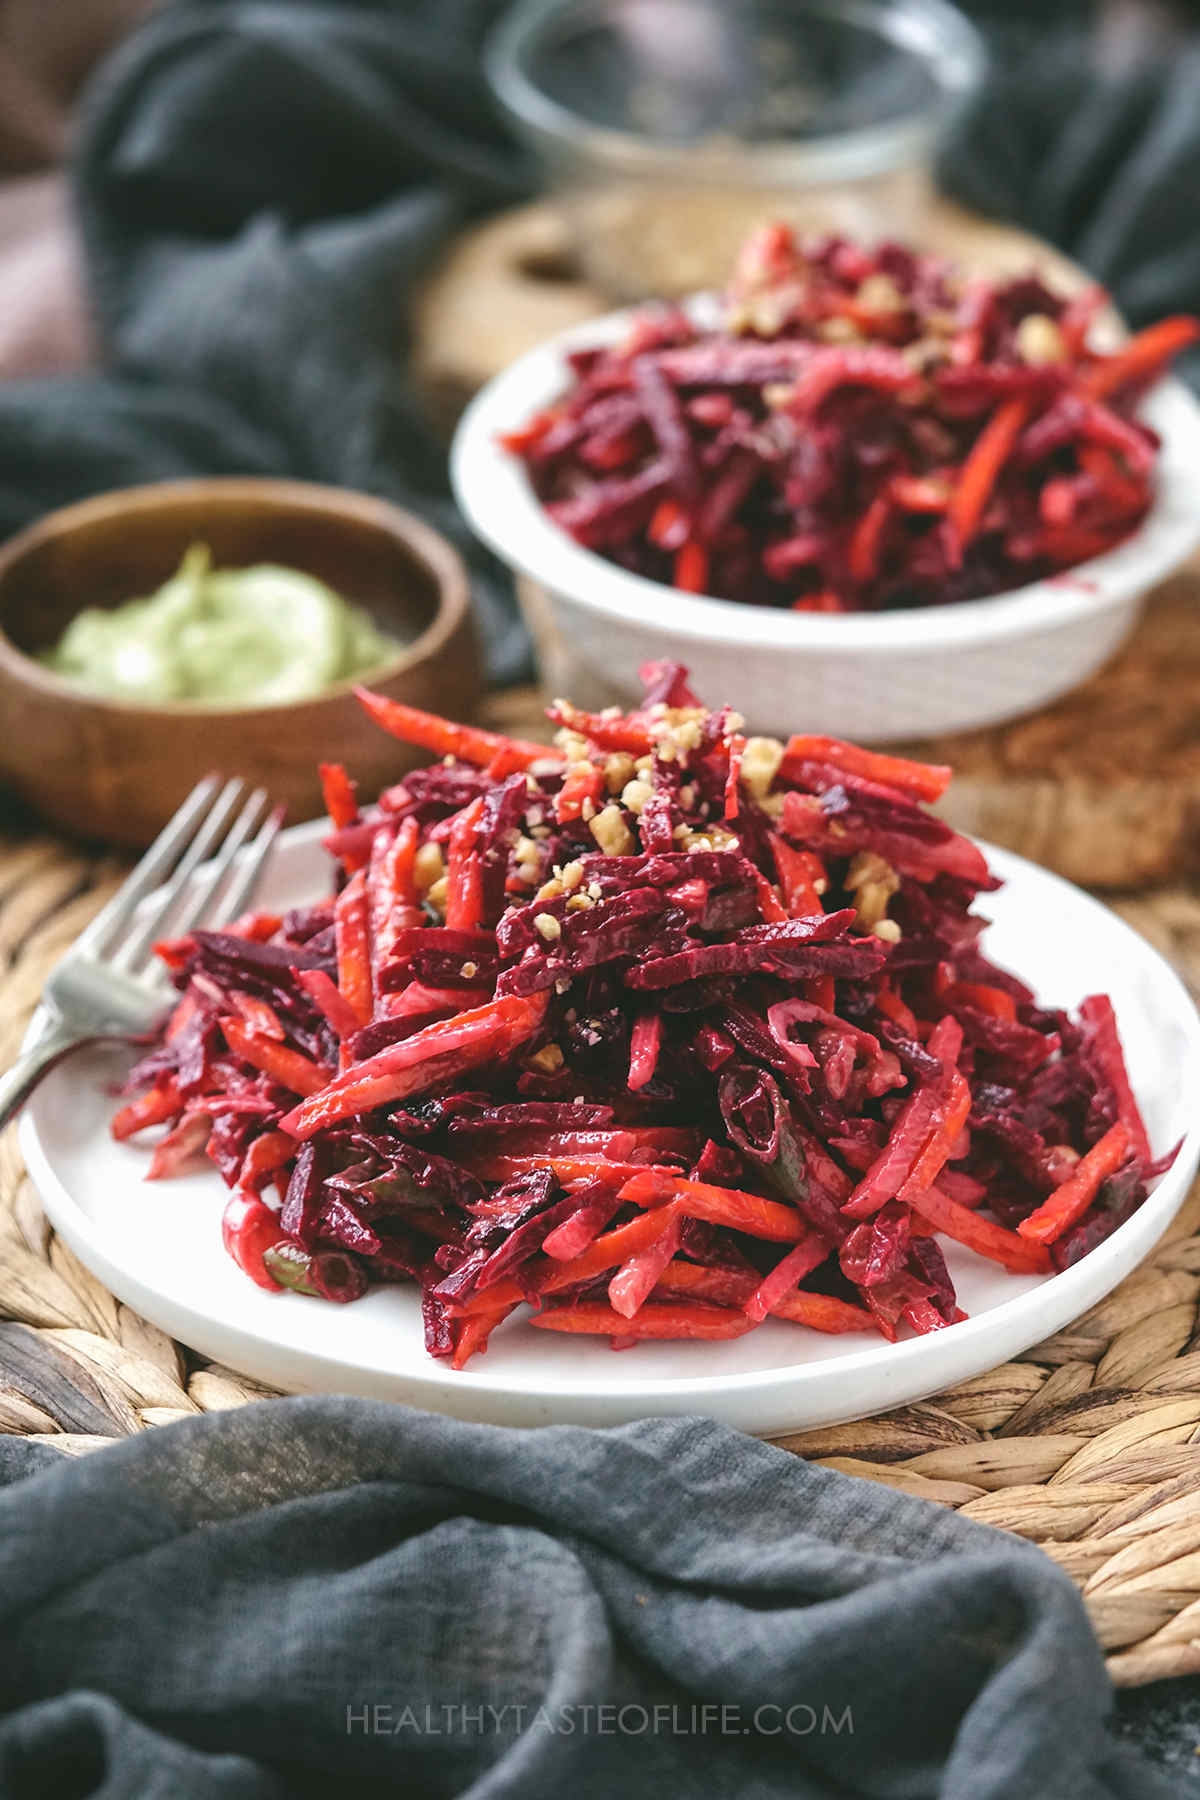 Grated and cooked beetroot and carrot salad served on a plate.